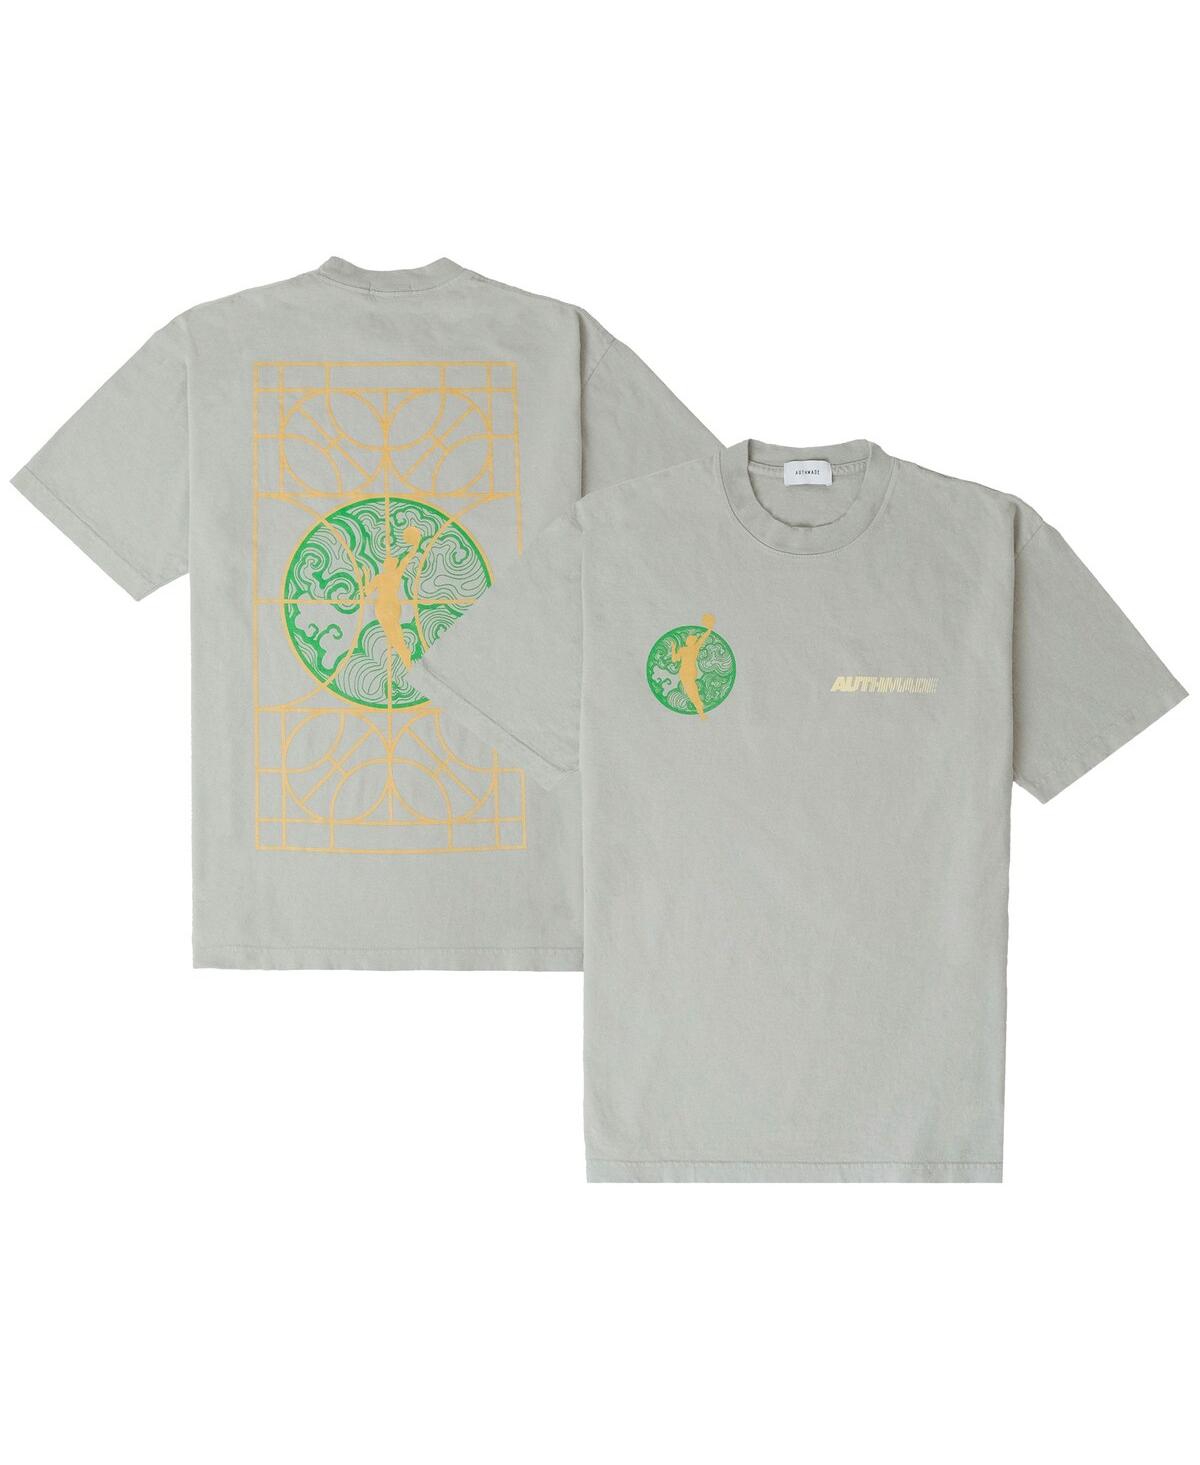 Shop Authmade Men's And Women's Light Green  Asian-american Pacific Islander Heritage Collection Heirloom